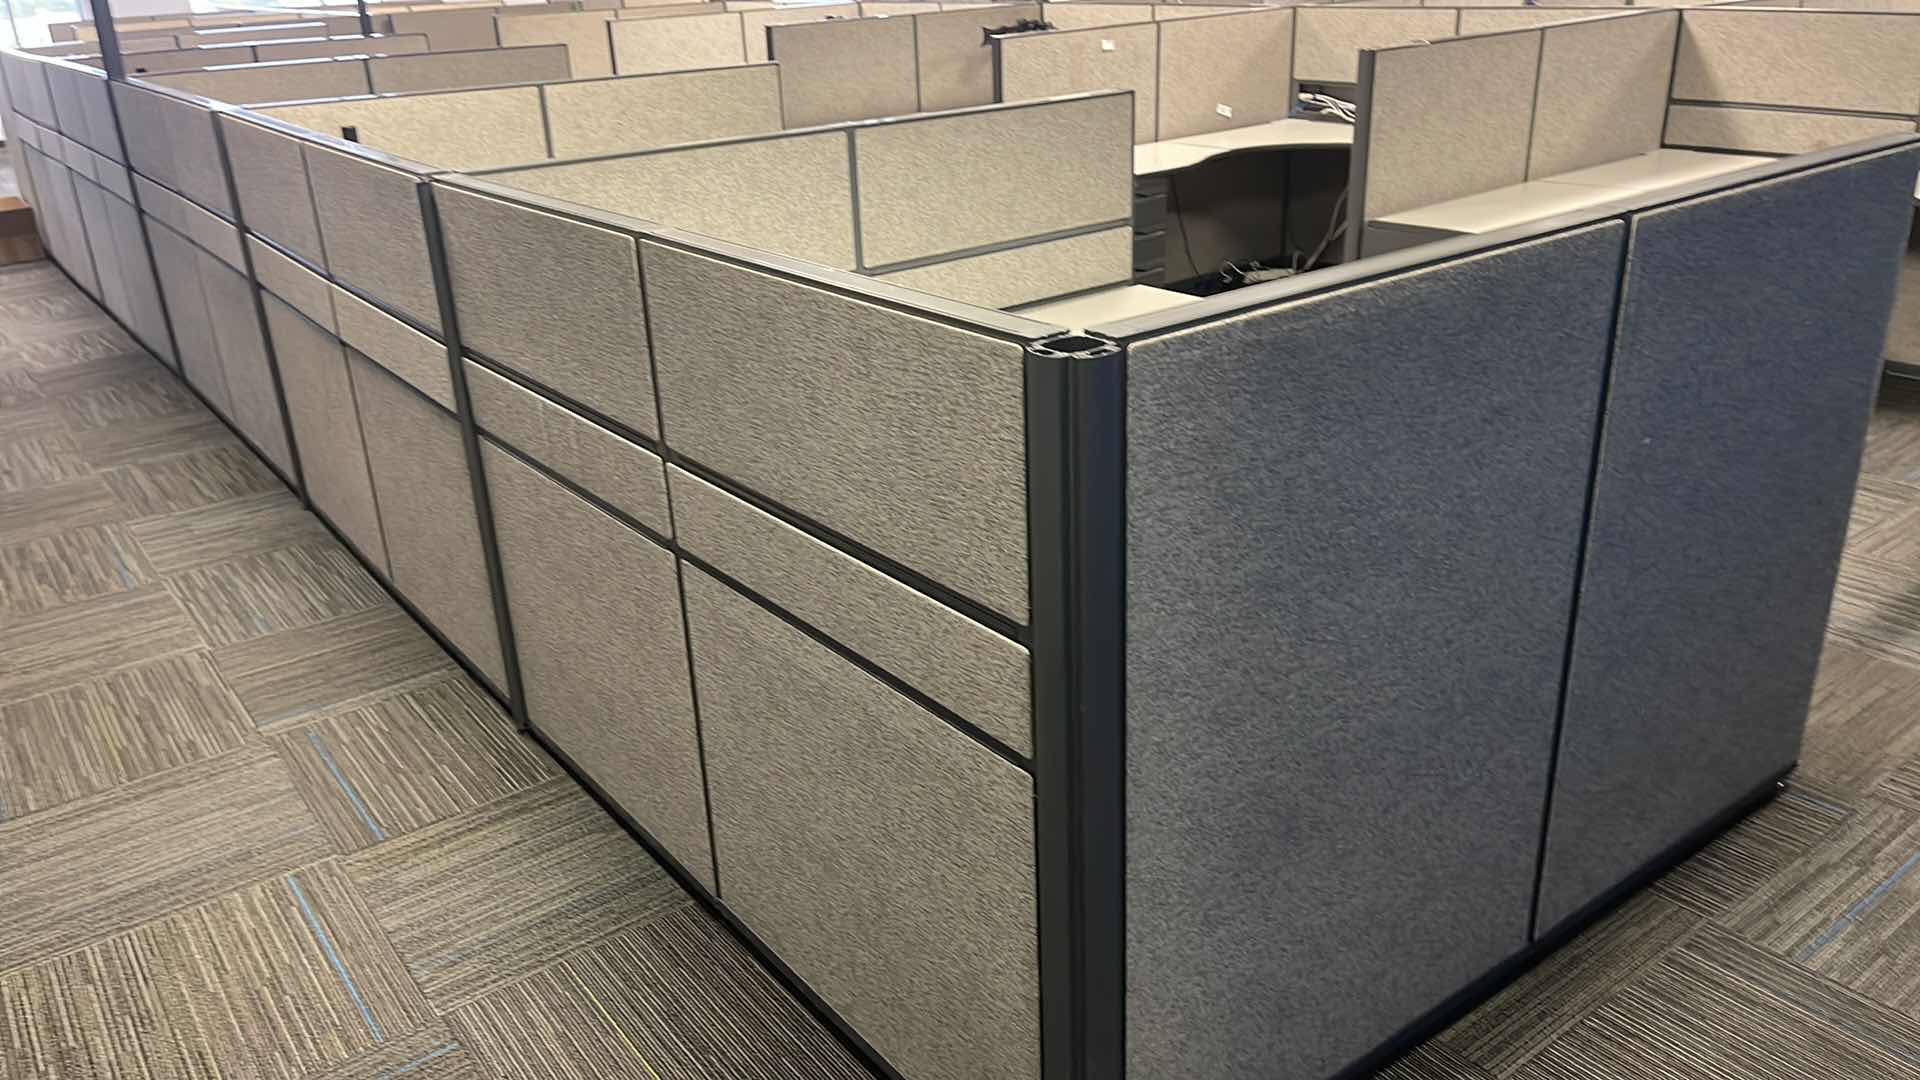 Photo 2 of 3 PC CUBICAL SET W 5 DRAWER MEDAL BASE DESKS 76” X 76” H50” (BUYER TO DISASSEMBLE & REMOVE FROM 2ND STORY OFFICE BUILDING W ELEVATOR)